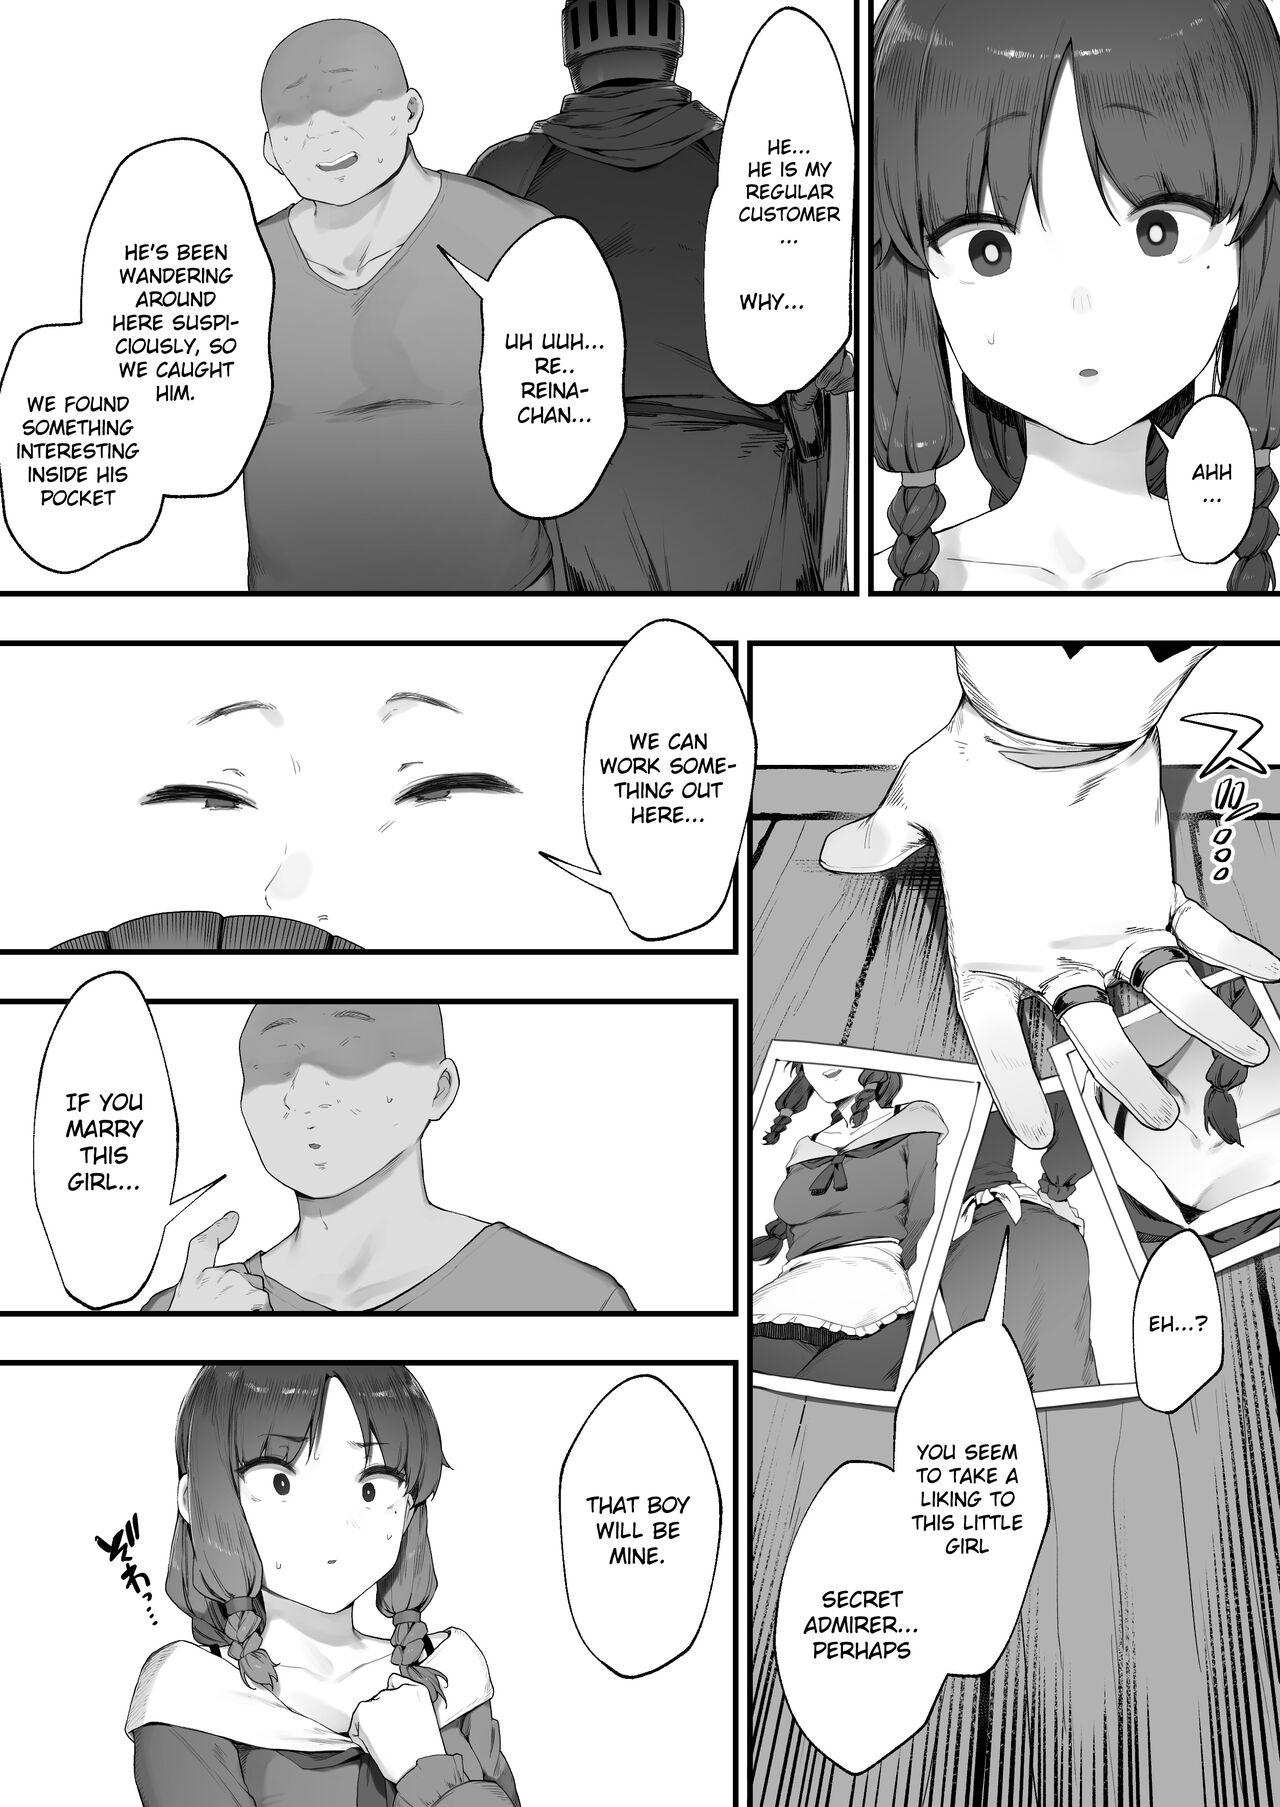 Cougar Oujo no Meirei de Stalker to Kekkon Saserareru Hanashi 1 | A story about being married to a stalker by the order of a princess 1 - Original Flaquita - Page 8